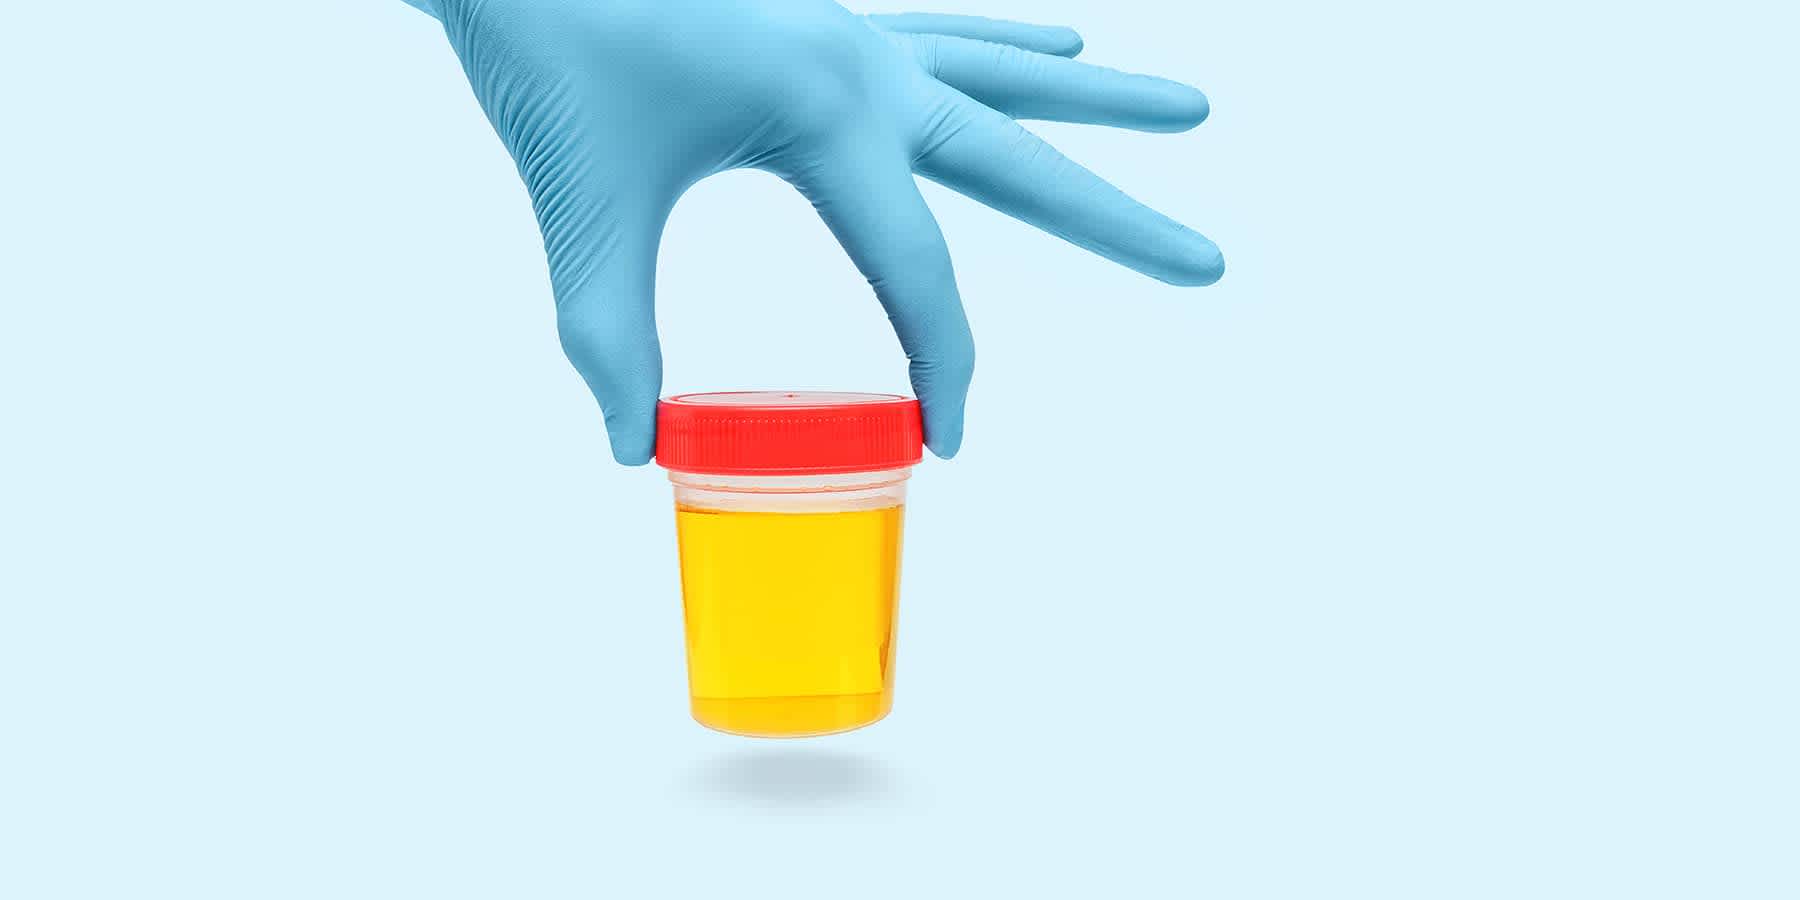 Healthcare provider with gloved hand holding urine sample to check for bladder infection vs. UTI